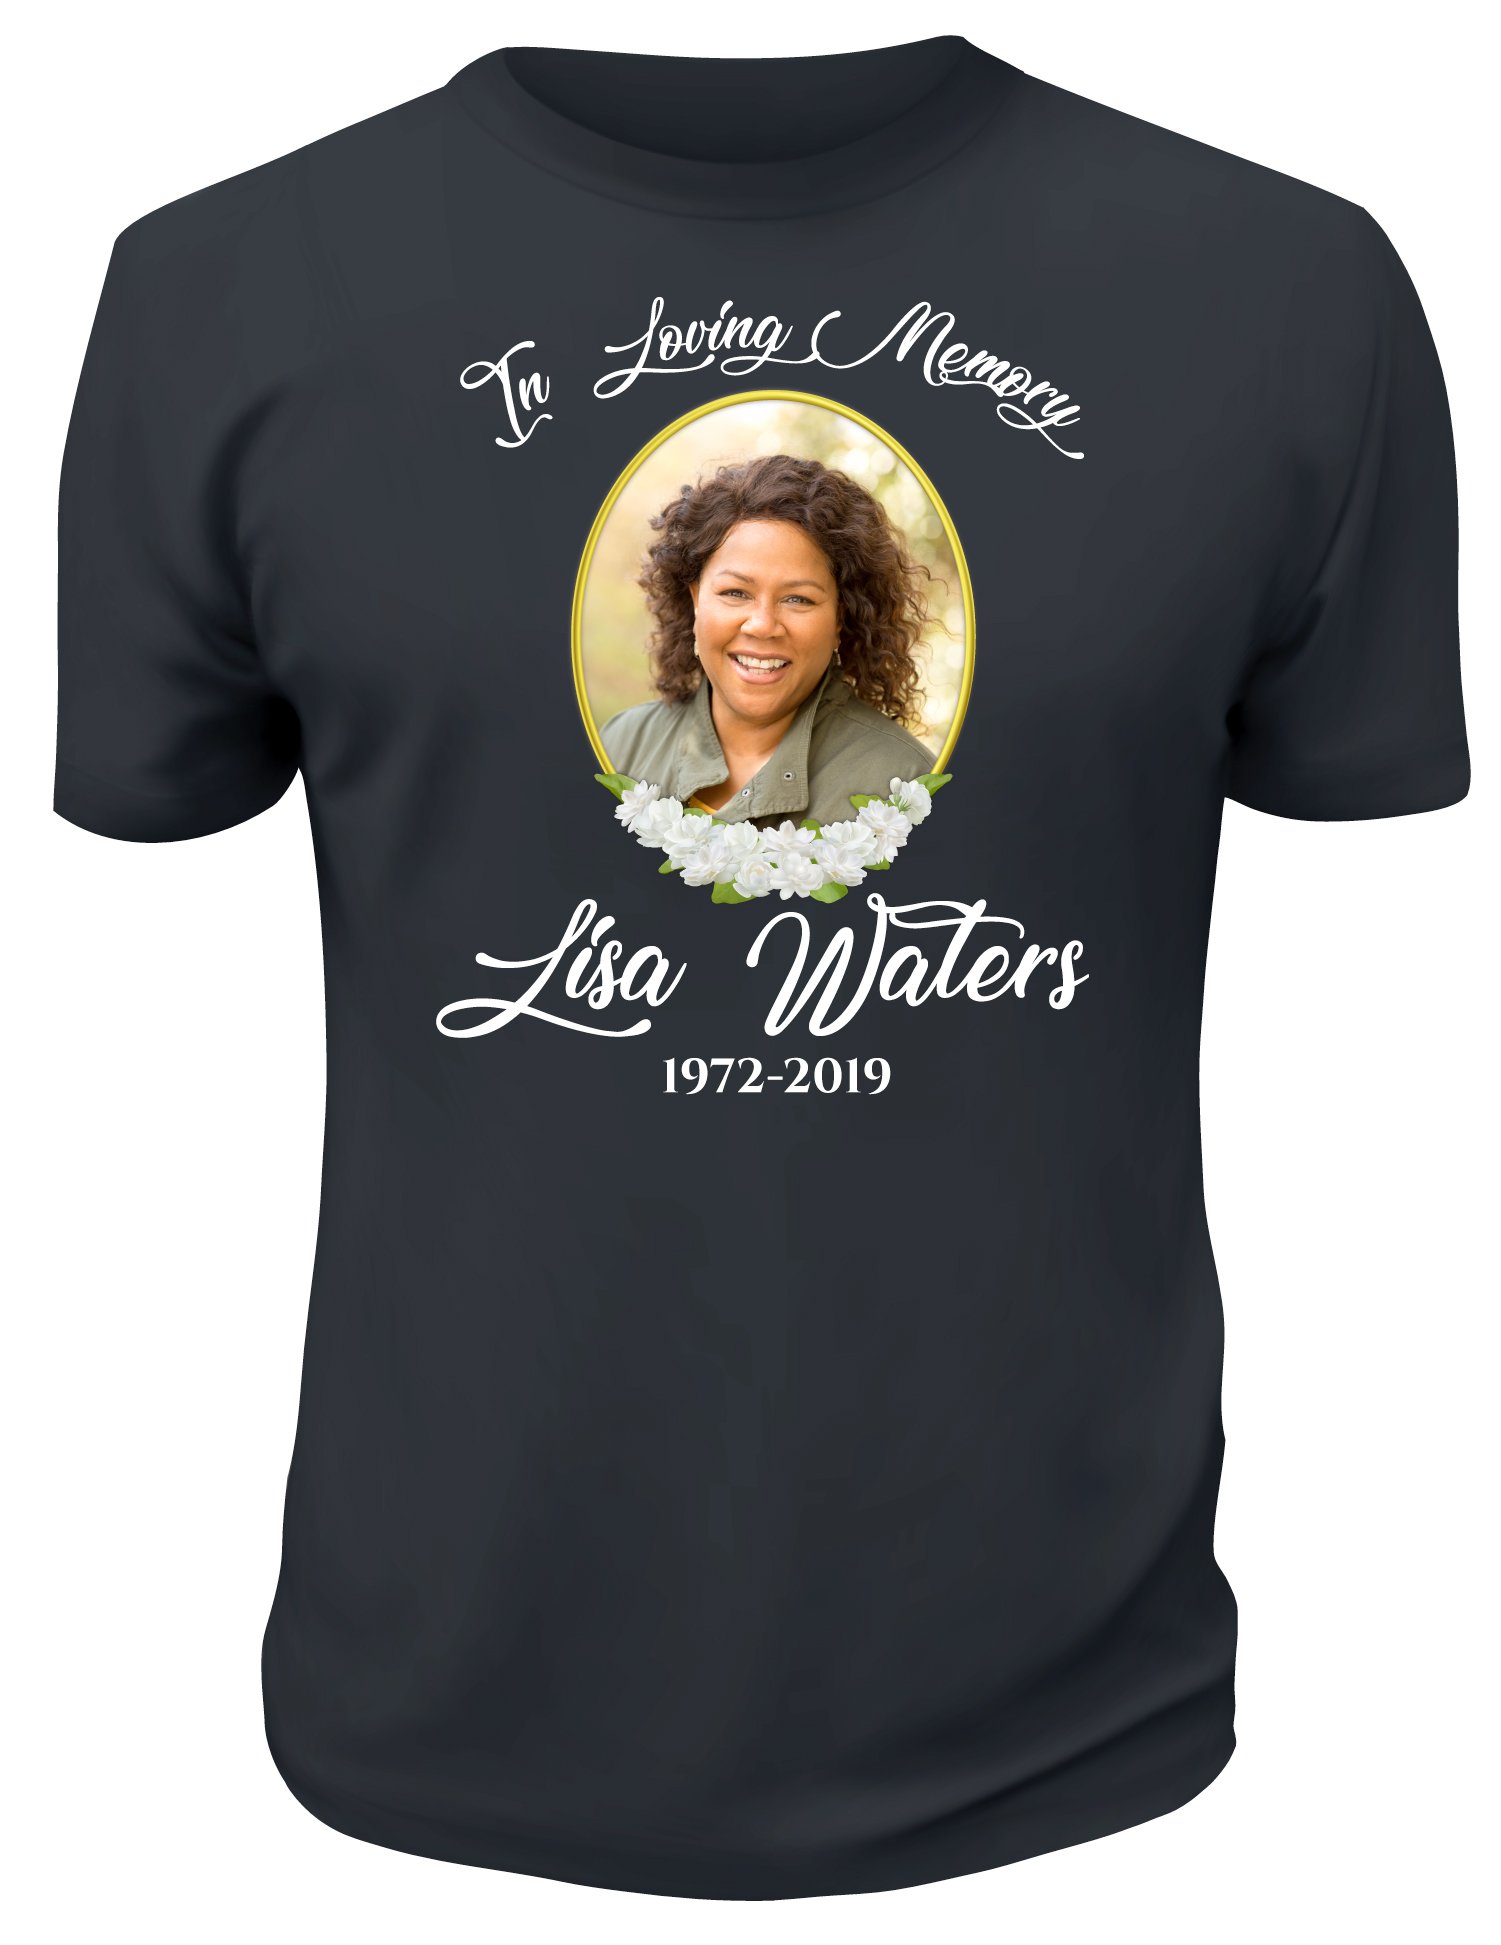 In Loving Memory T-shirt, Custom Photo Rest In Peace Shirt, Upload Picture  Shirt, Personalized Family Memorial Shirt, In Loving Memory Of My Son